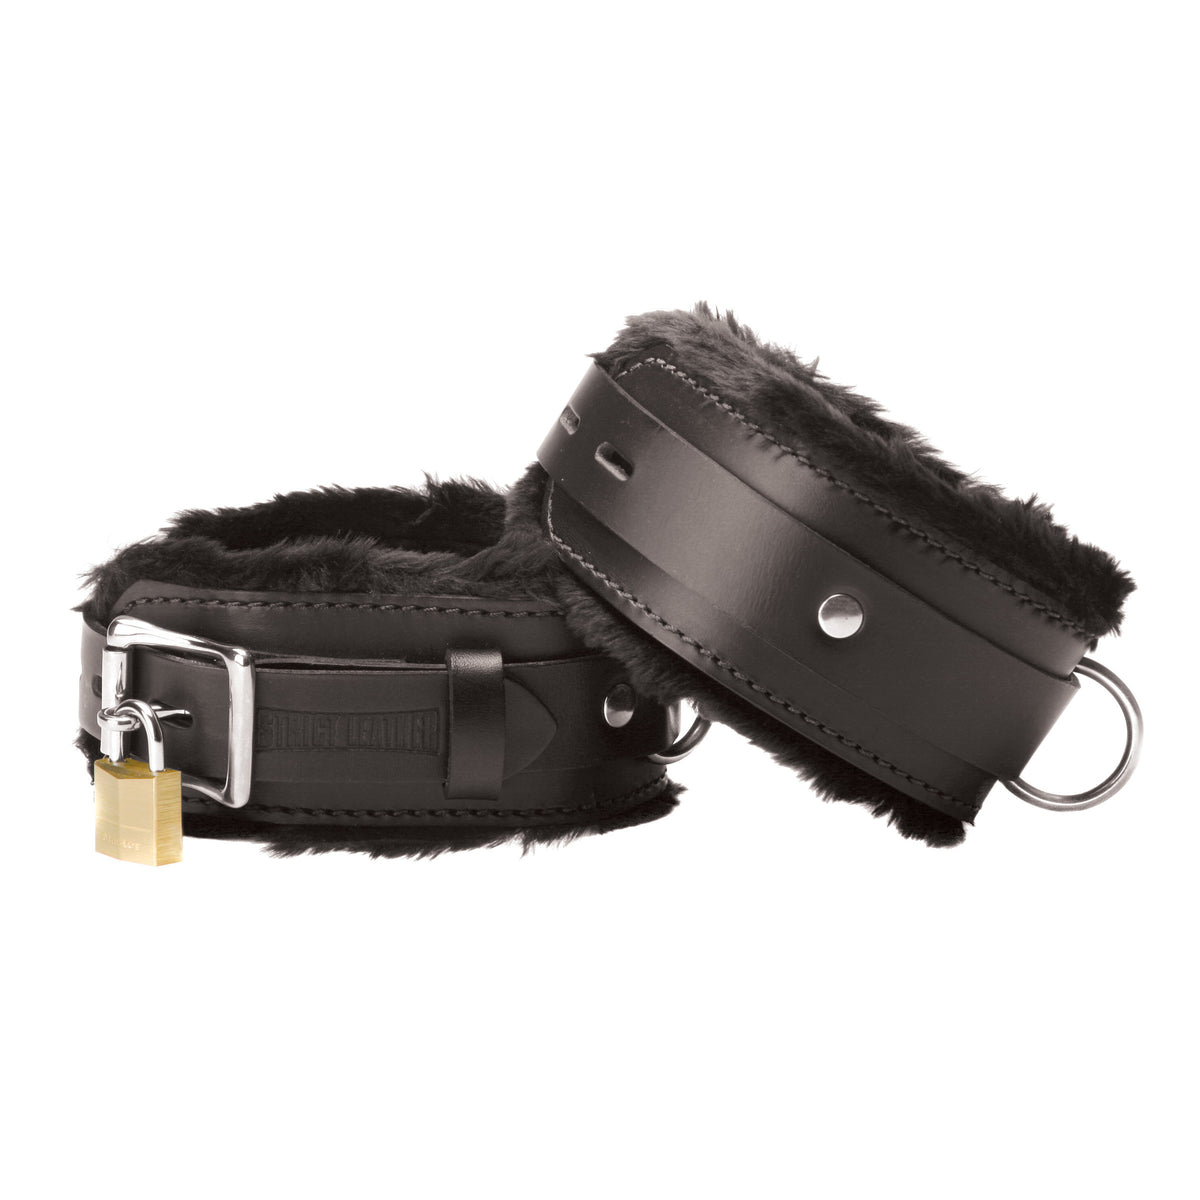 Strict Leather Premium Fur Lined Cuffs